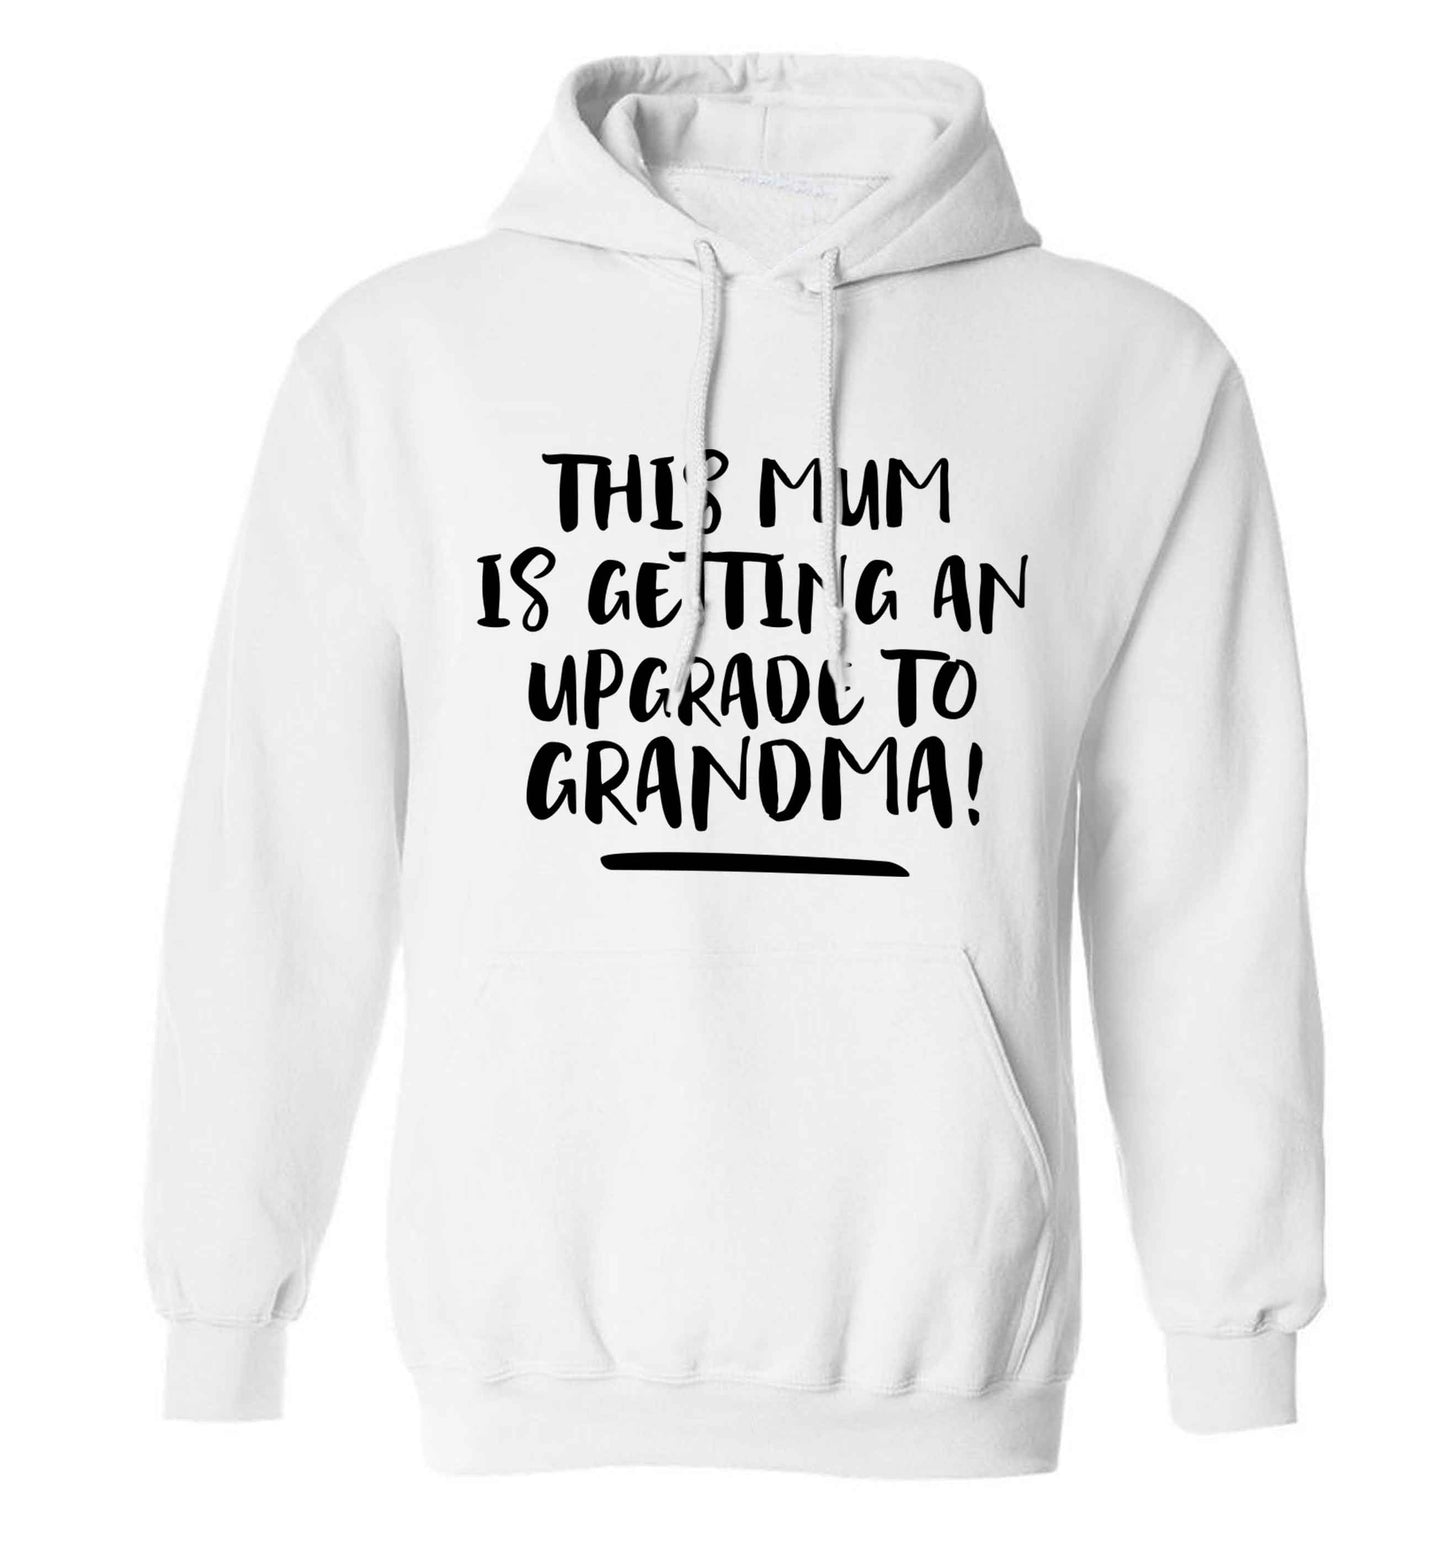 This mum is getting an upgrade to grandma! adults unisex white hoodie 2XL